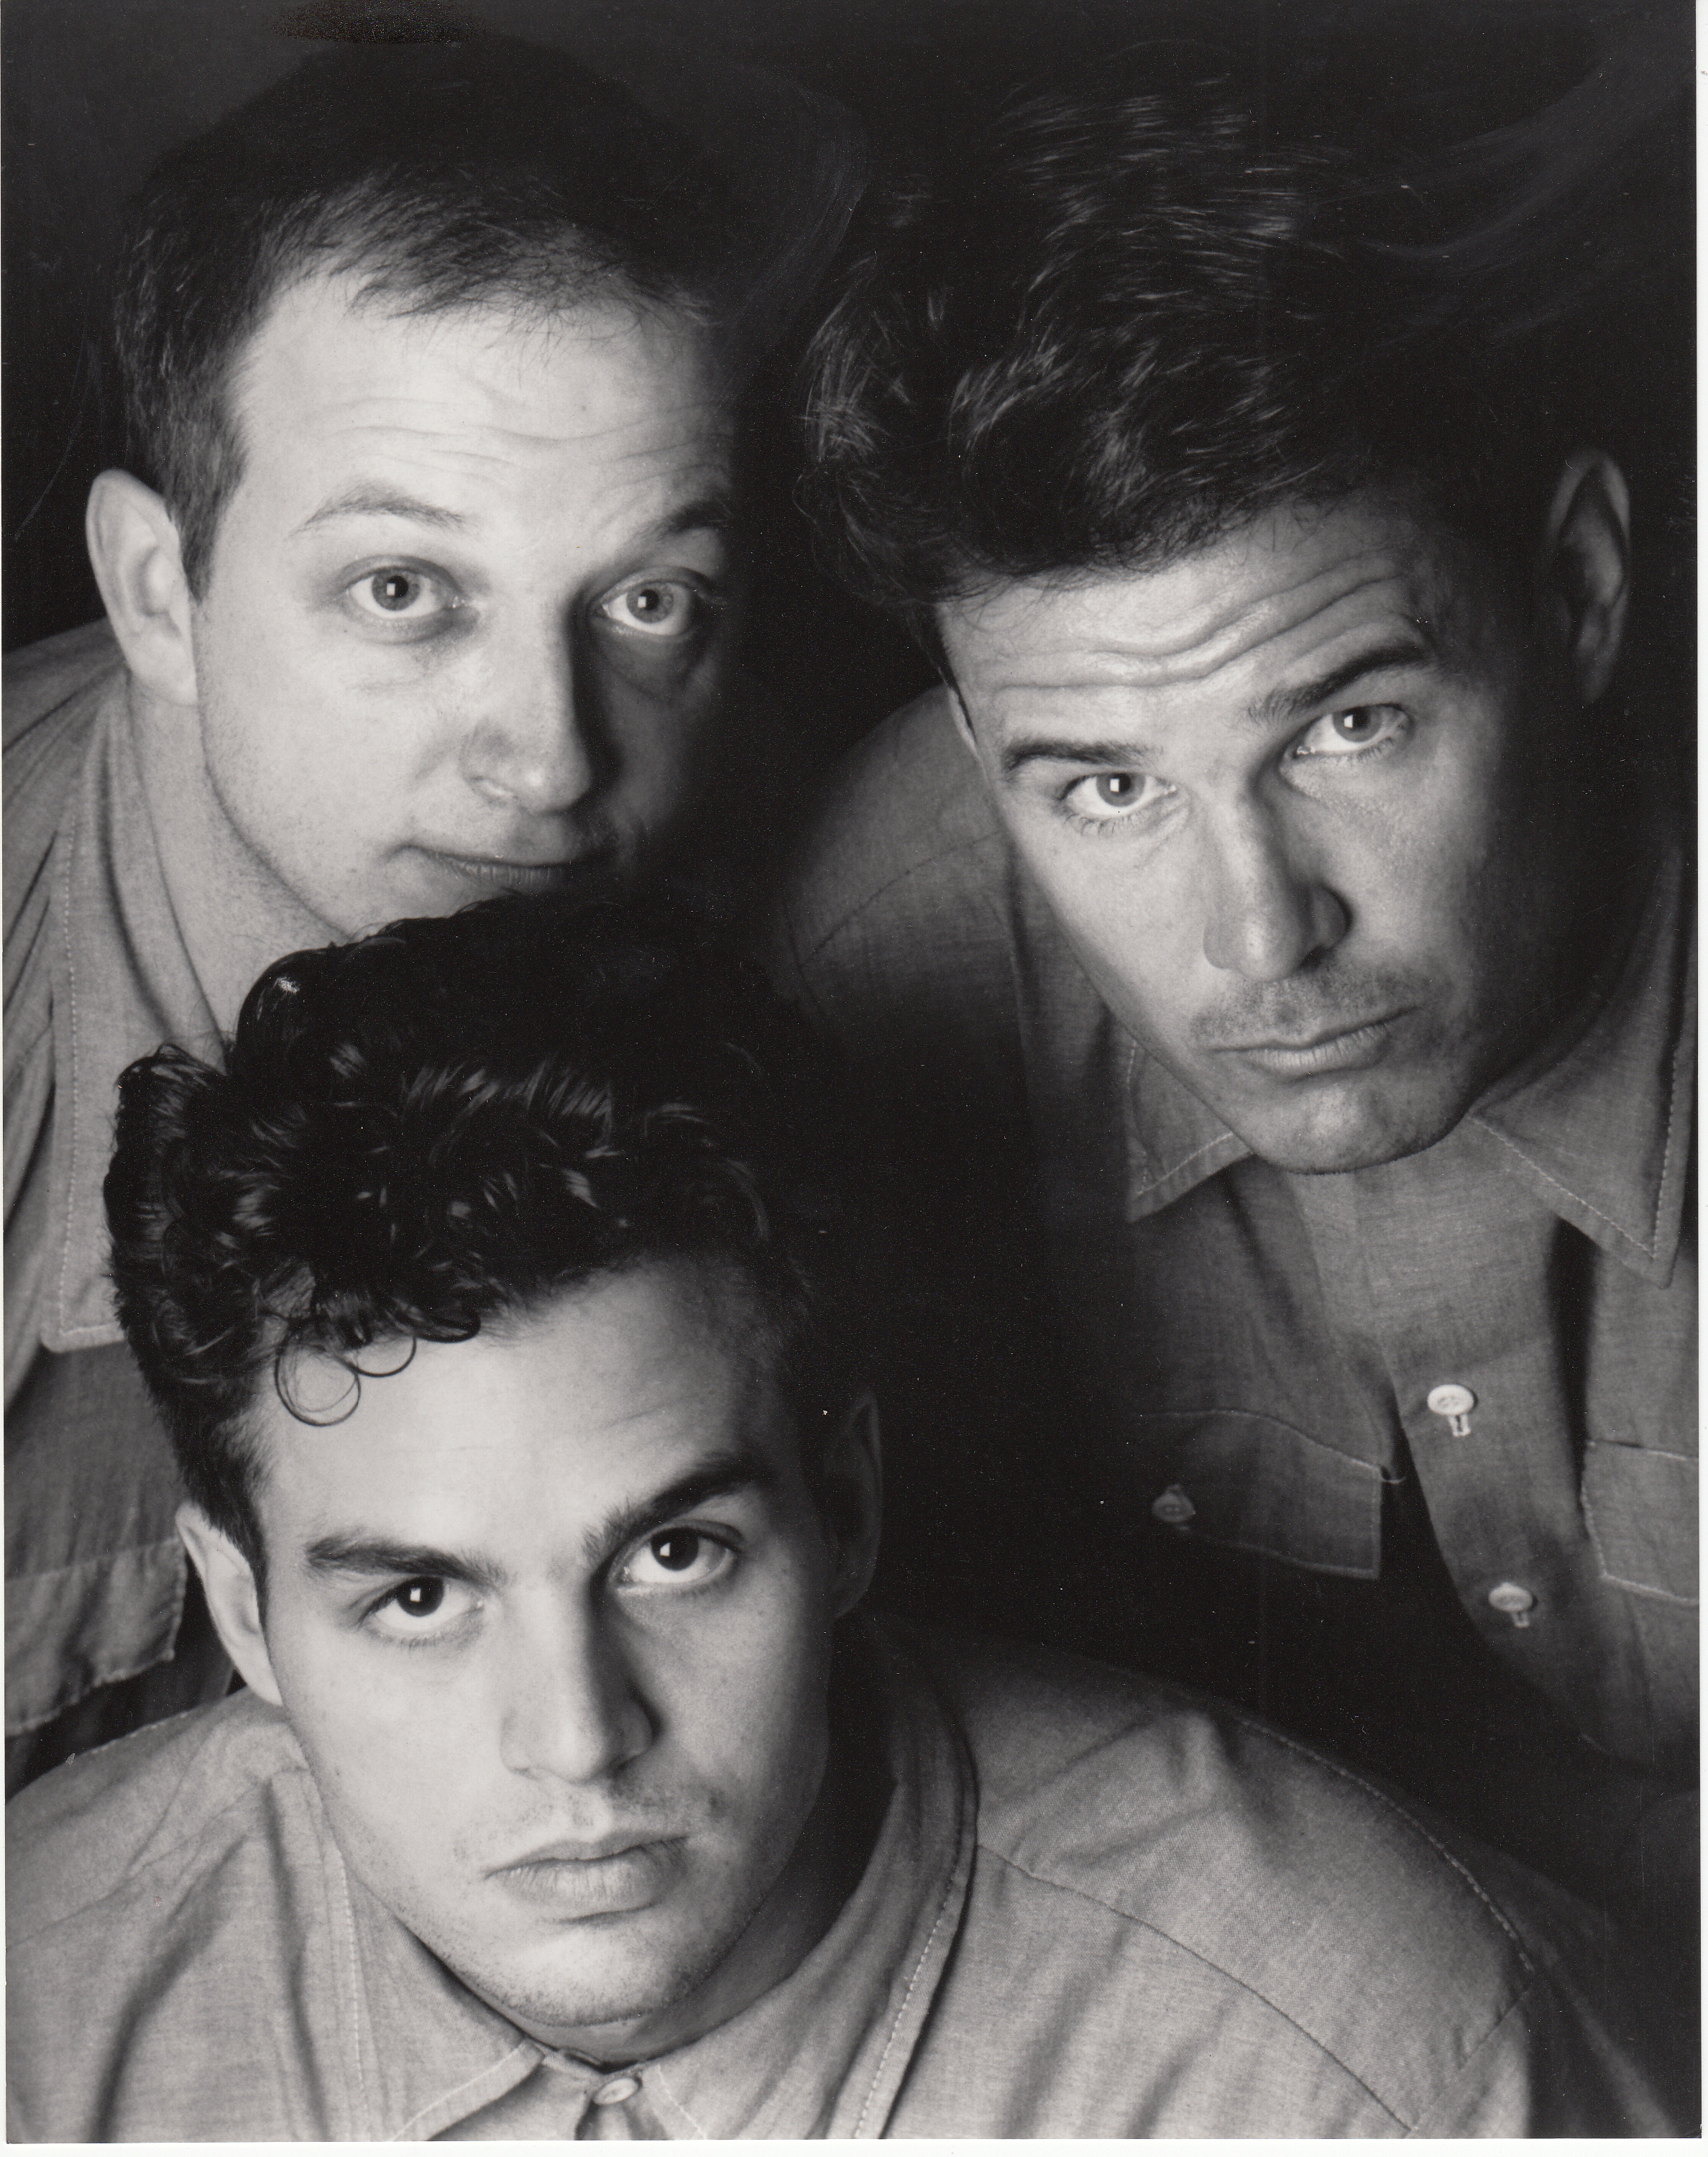 Tim McNeil, David M. O'Neill and Mark Ruffalo - Keep Tighly Closed in a Cool Dry Place.